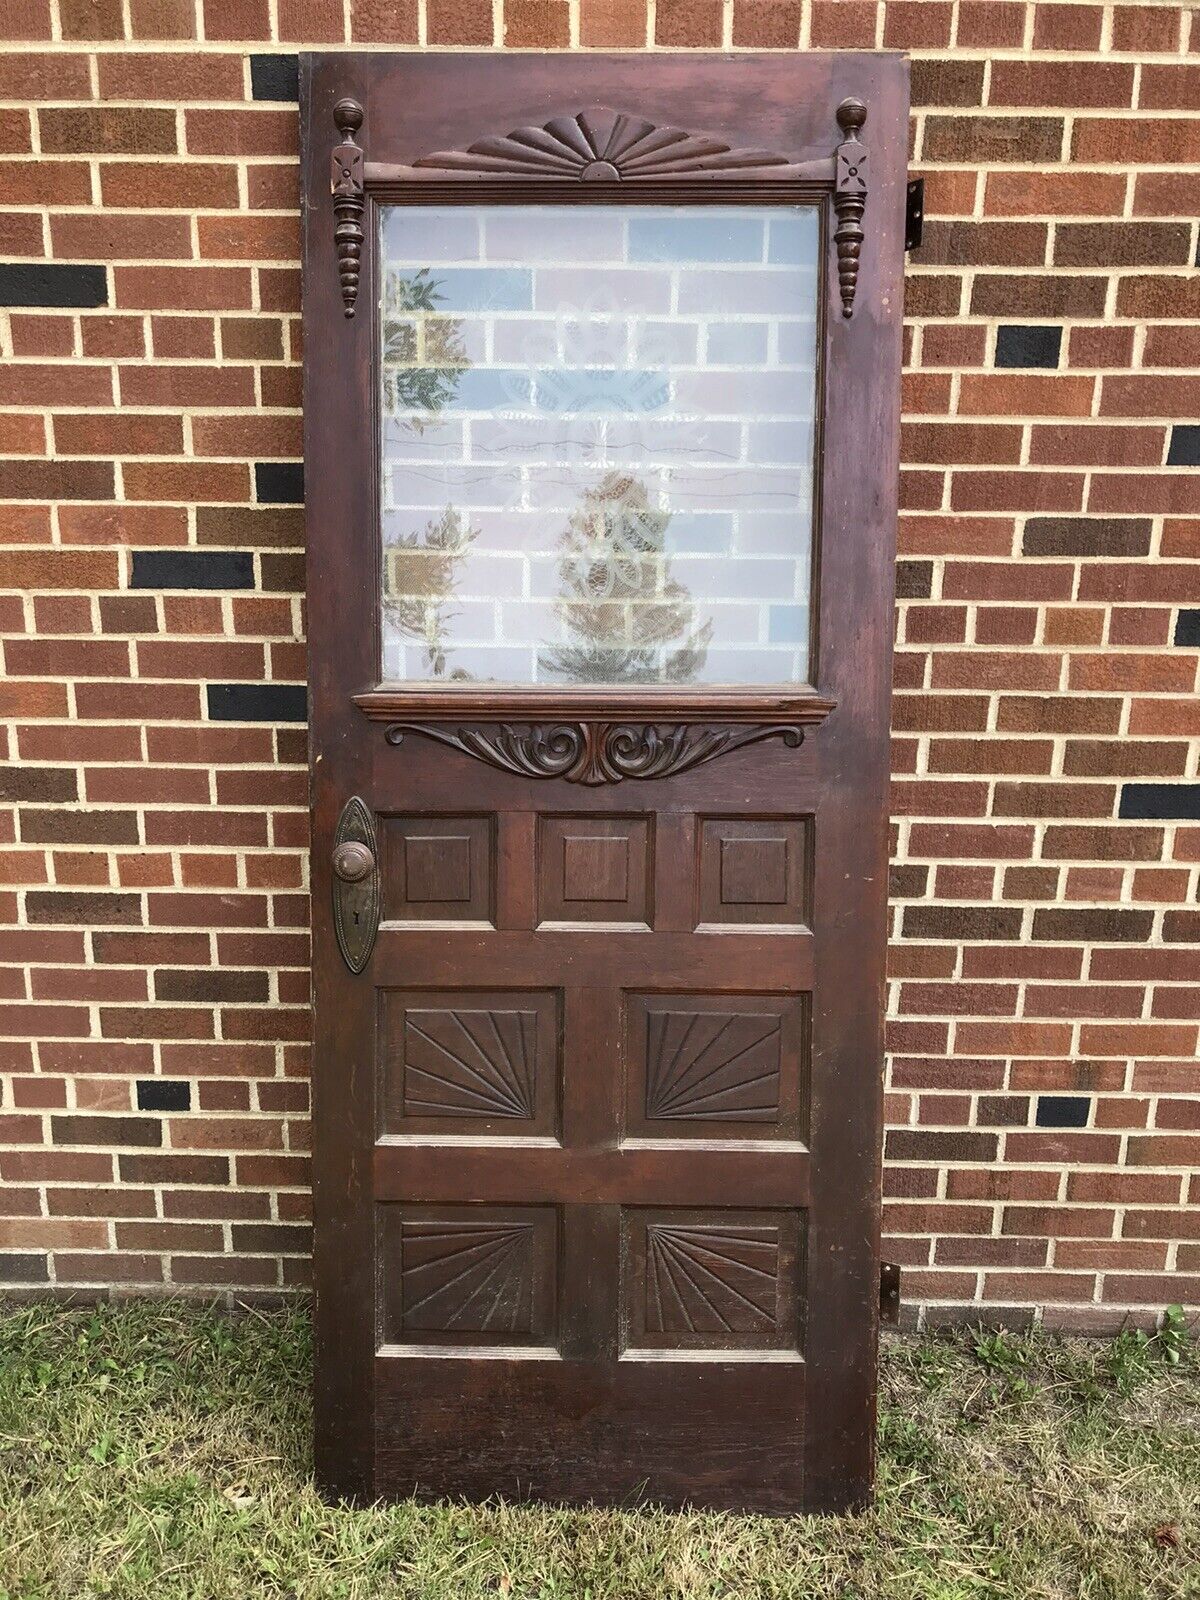 ANTIQUE VTG SOLID WOOD ORNATE DOOR WITH ETCH LOOK GLASS 32” X 6’ 8”  X 1 1/4” 